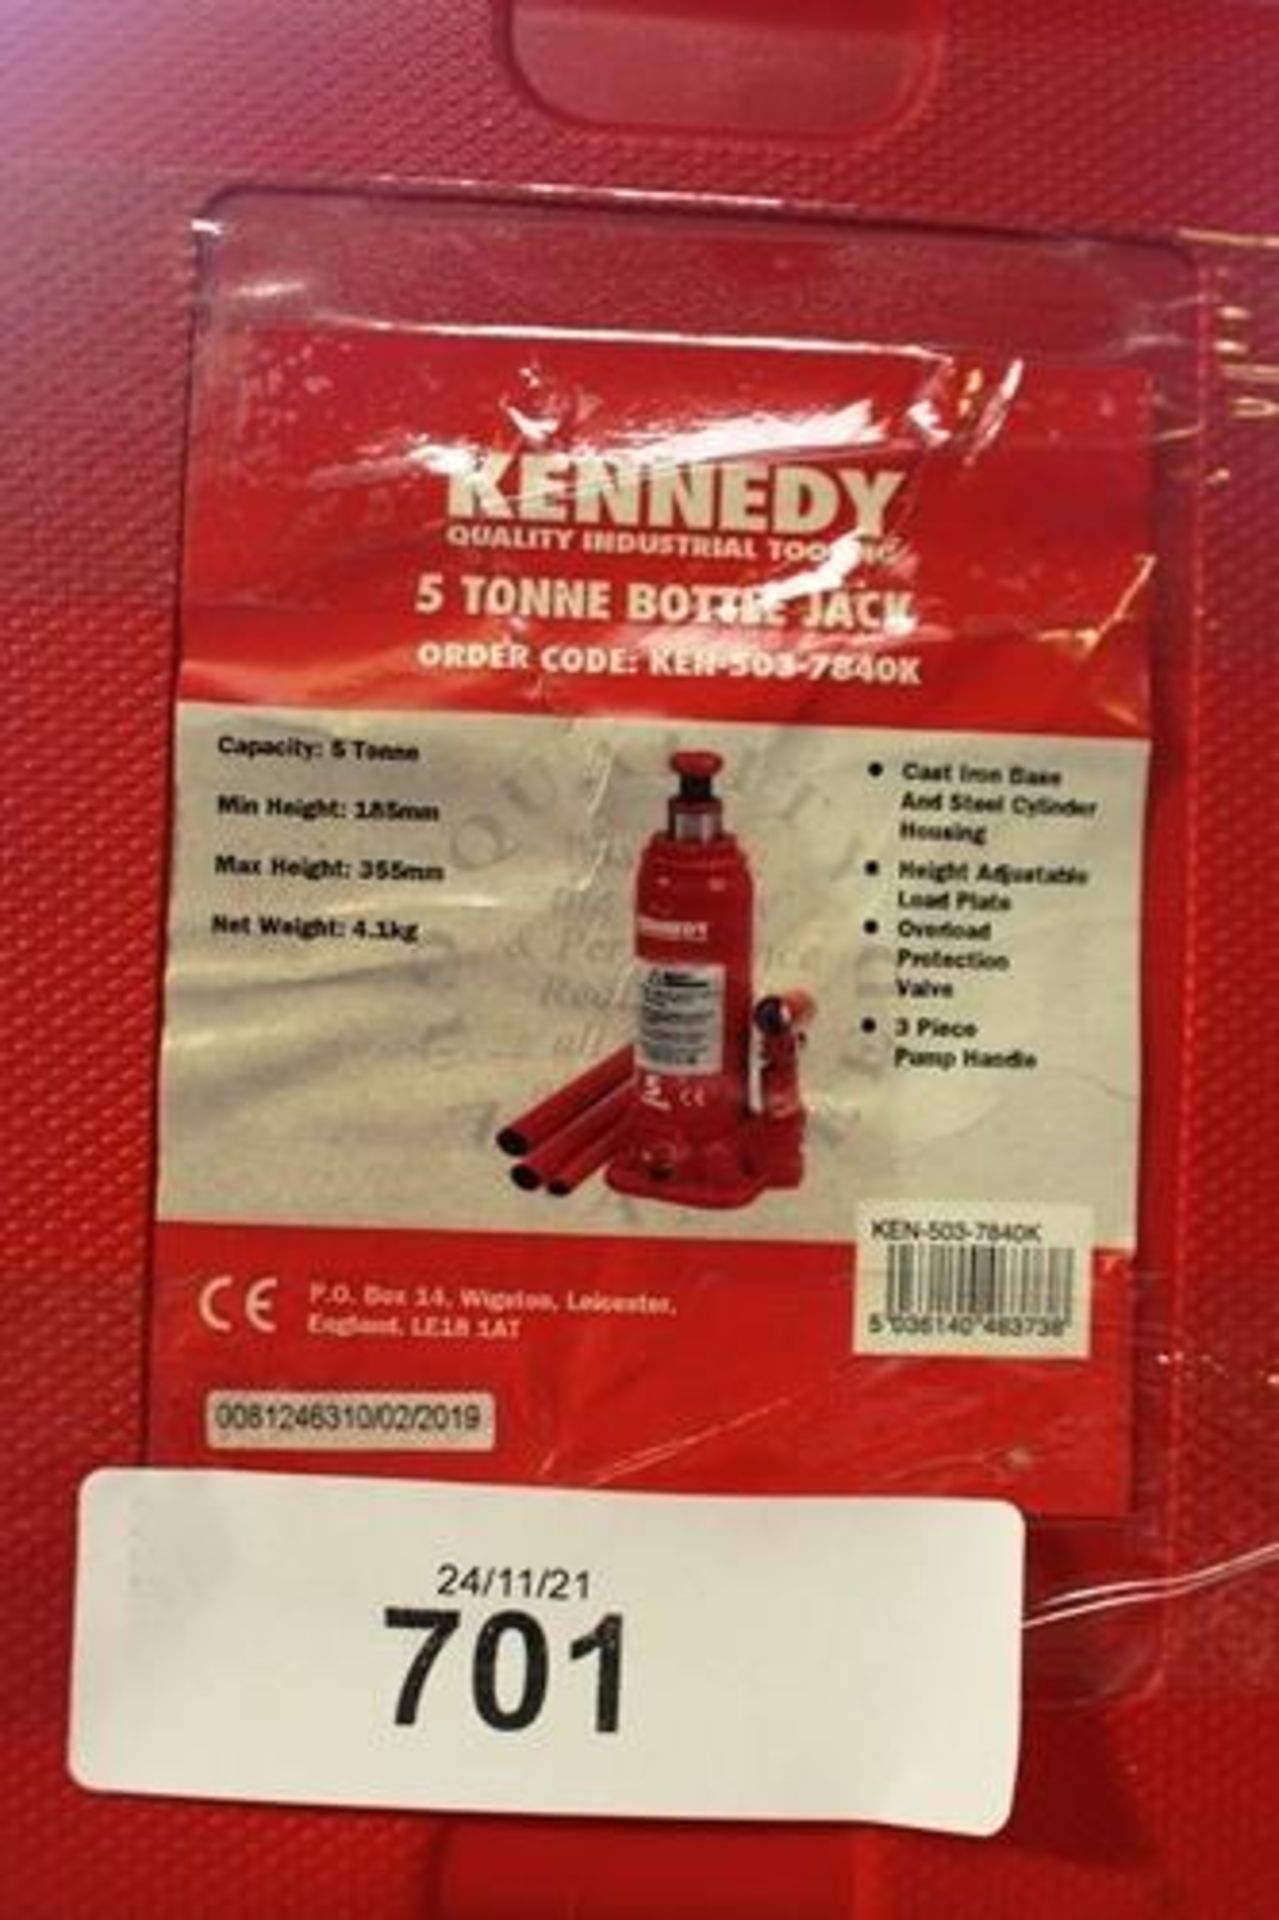 1 x Kennedy dent puller set, 1 x Kennedy 5T and 1 x 2T bottles jacks and 1 x ALB 30558 vacuum - Image 3 of 4